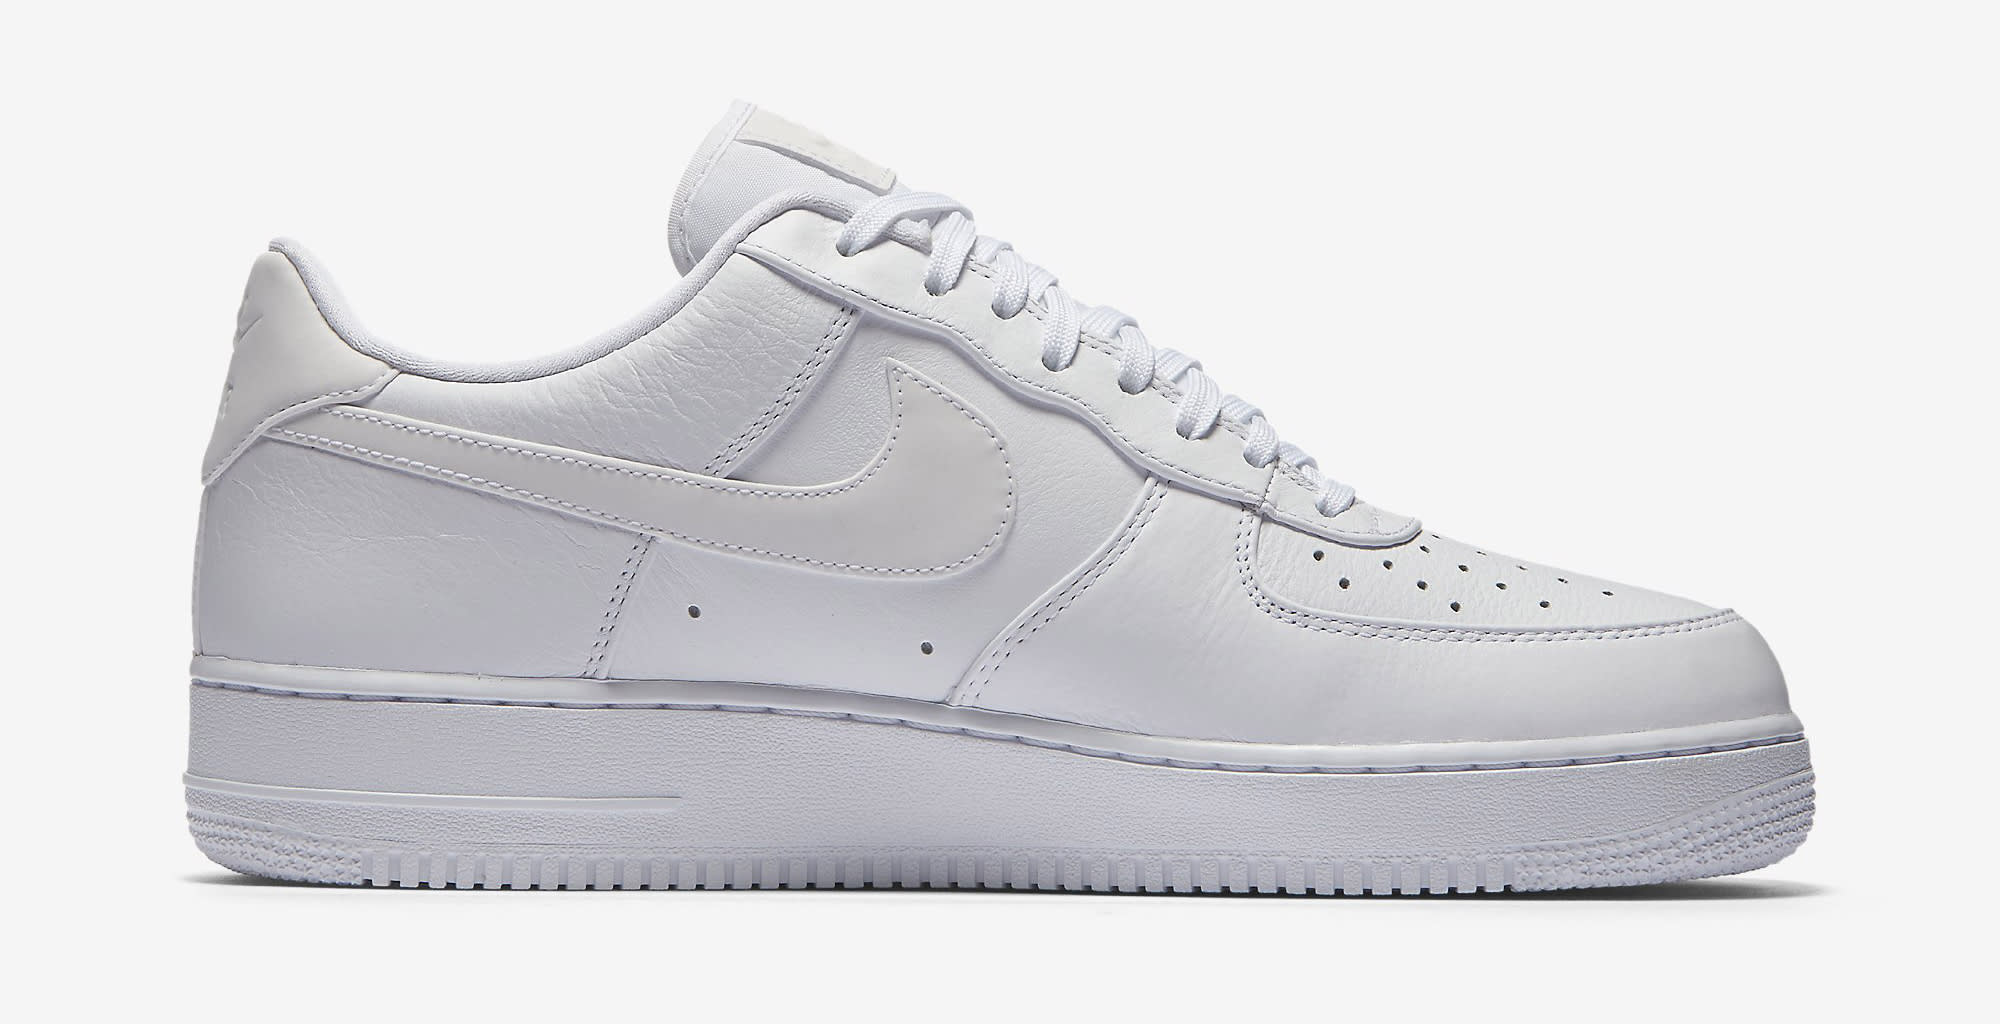 Nike Air Force 1 White Reflective 905345-100 Medial